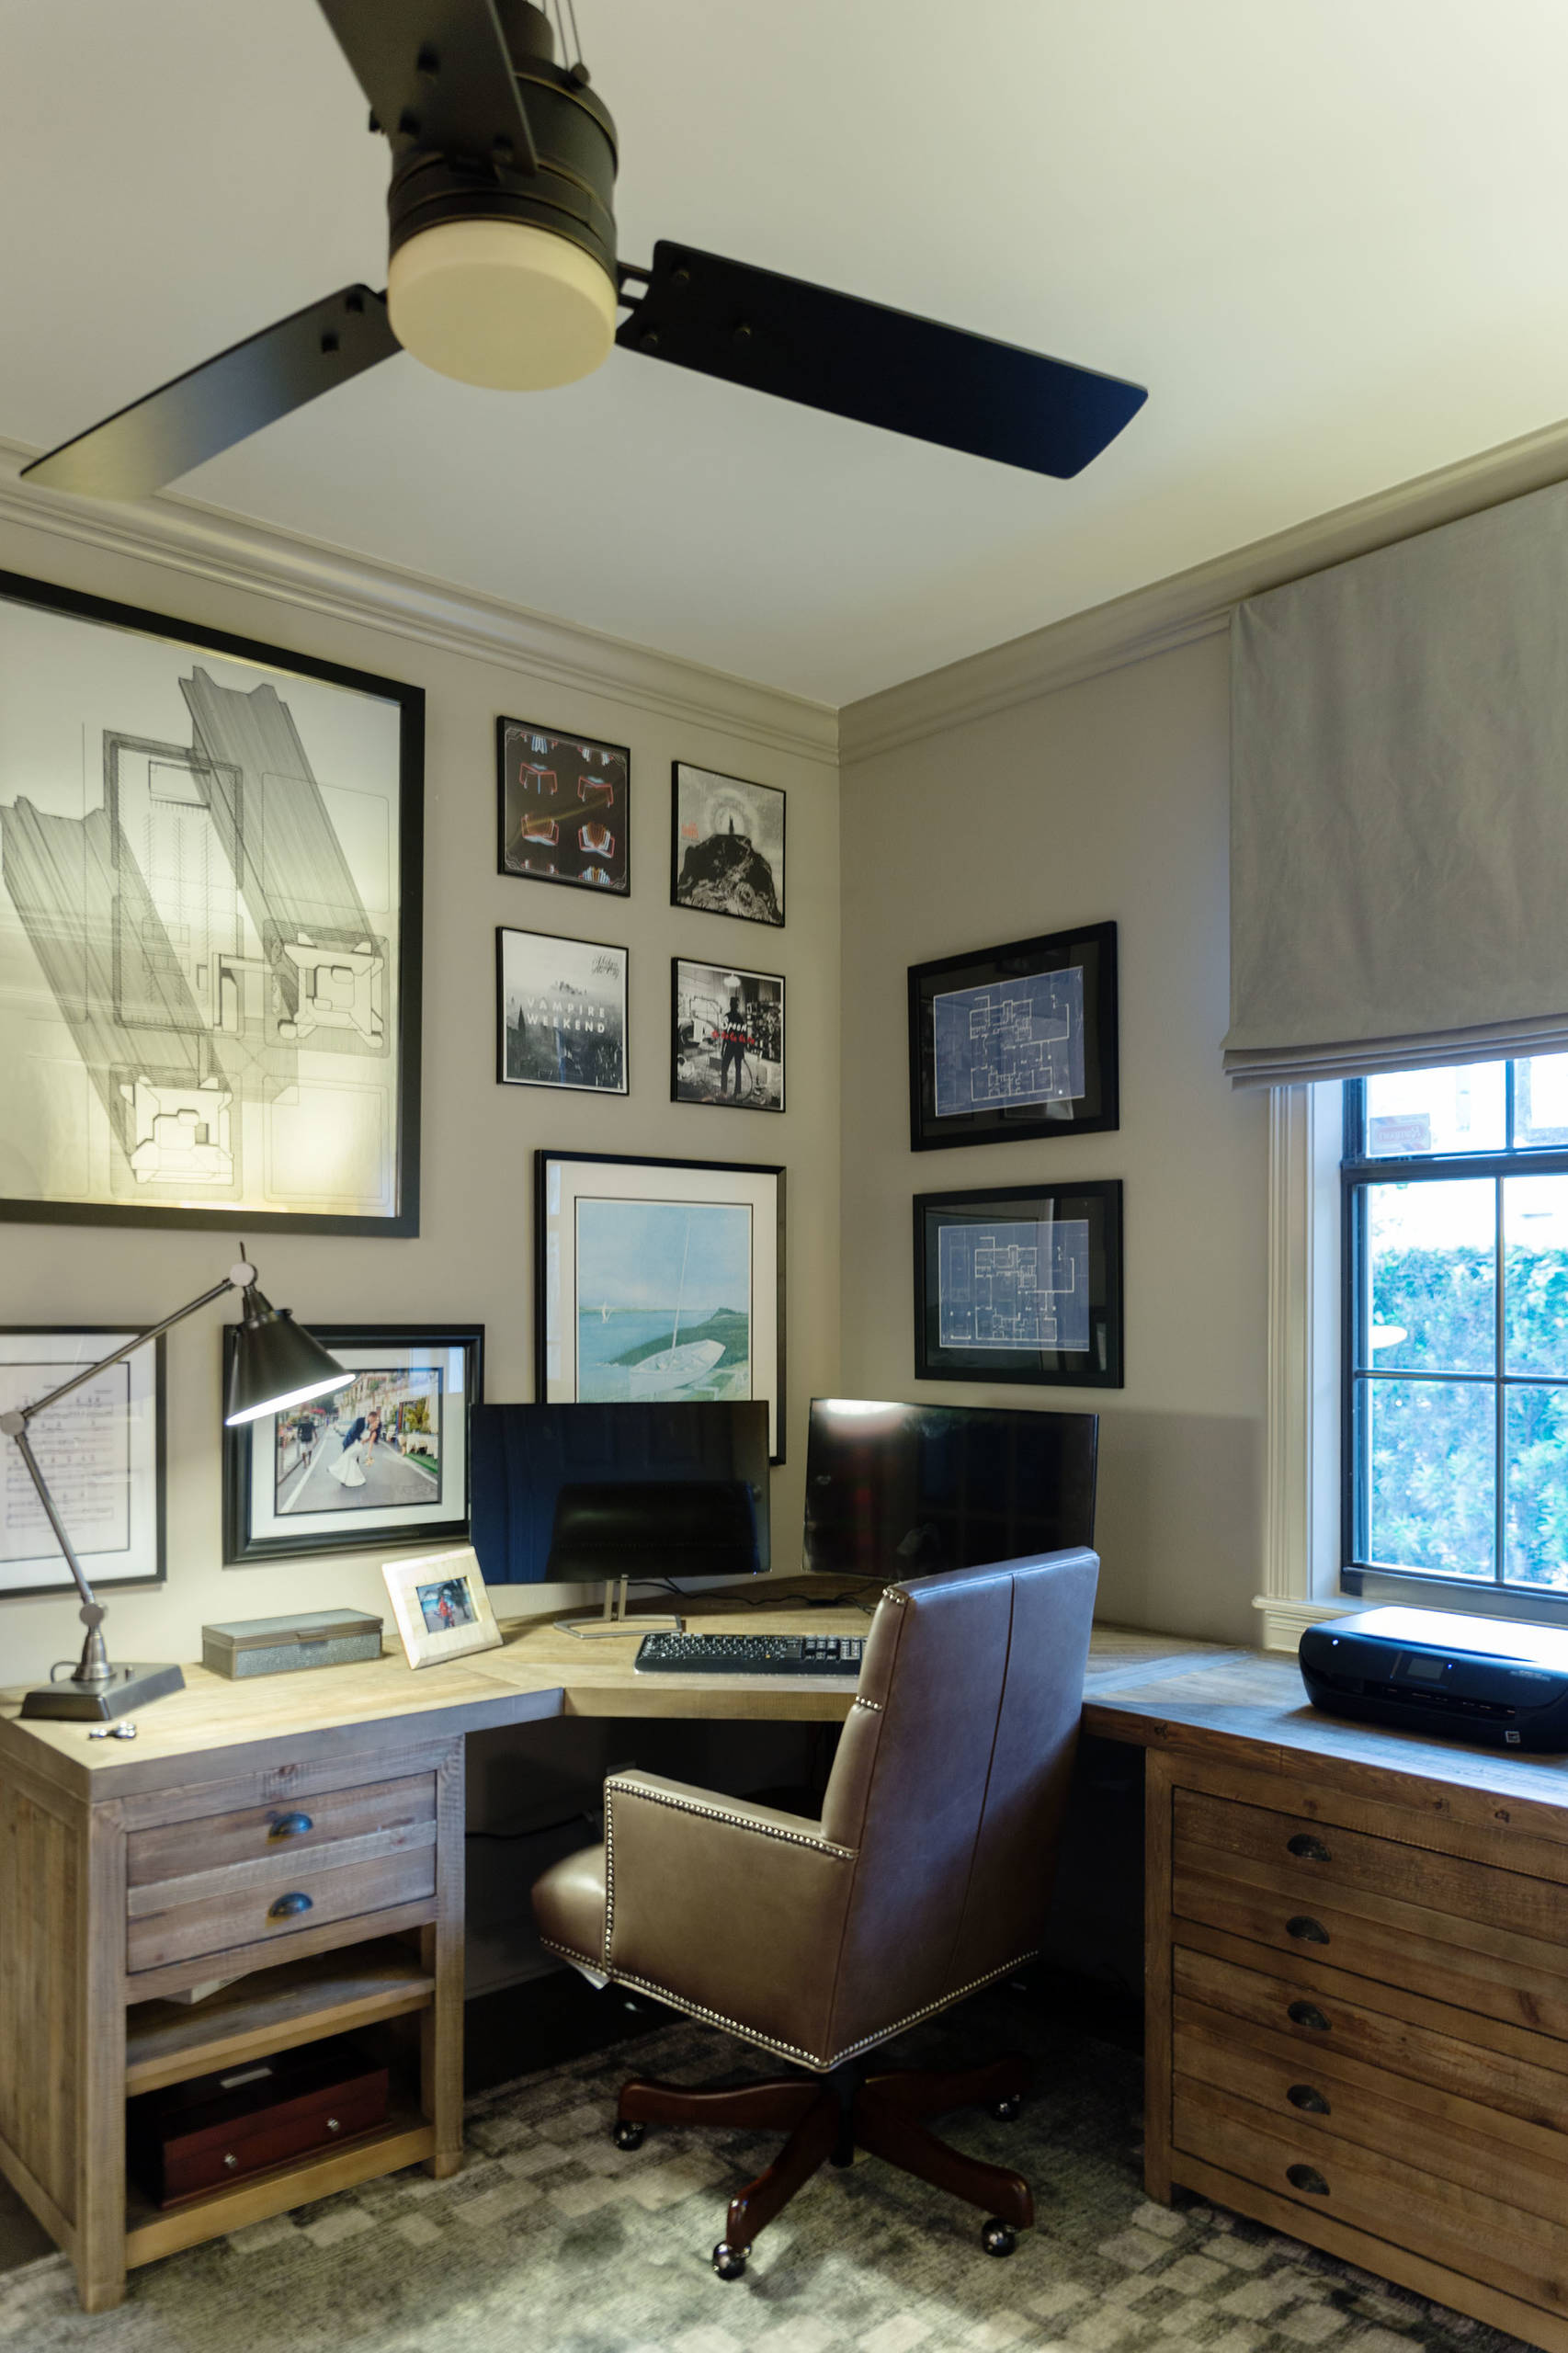 75 Beautiful Rustic Home Office Pictures Ideas December 2020 Houzz